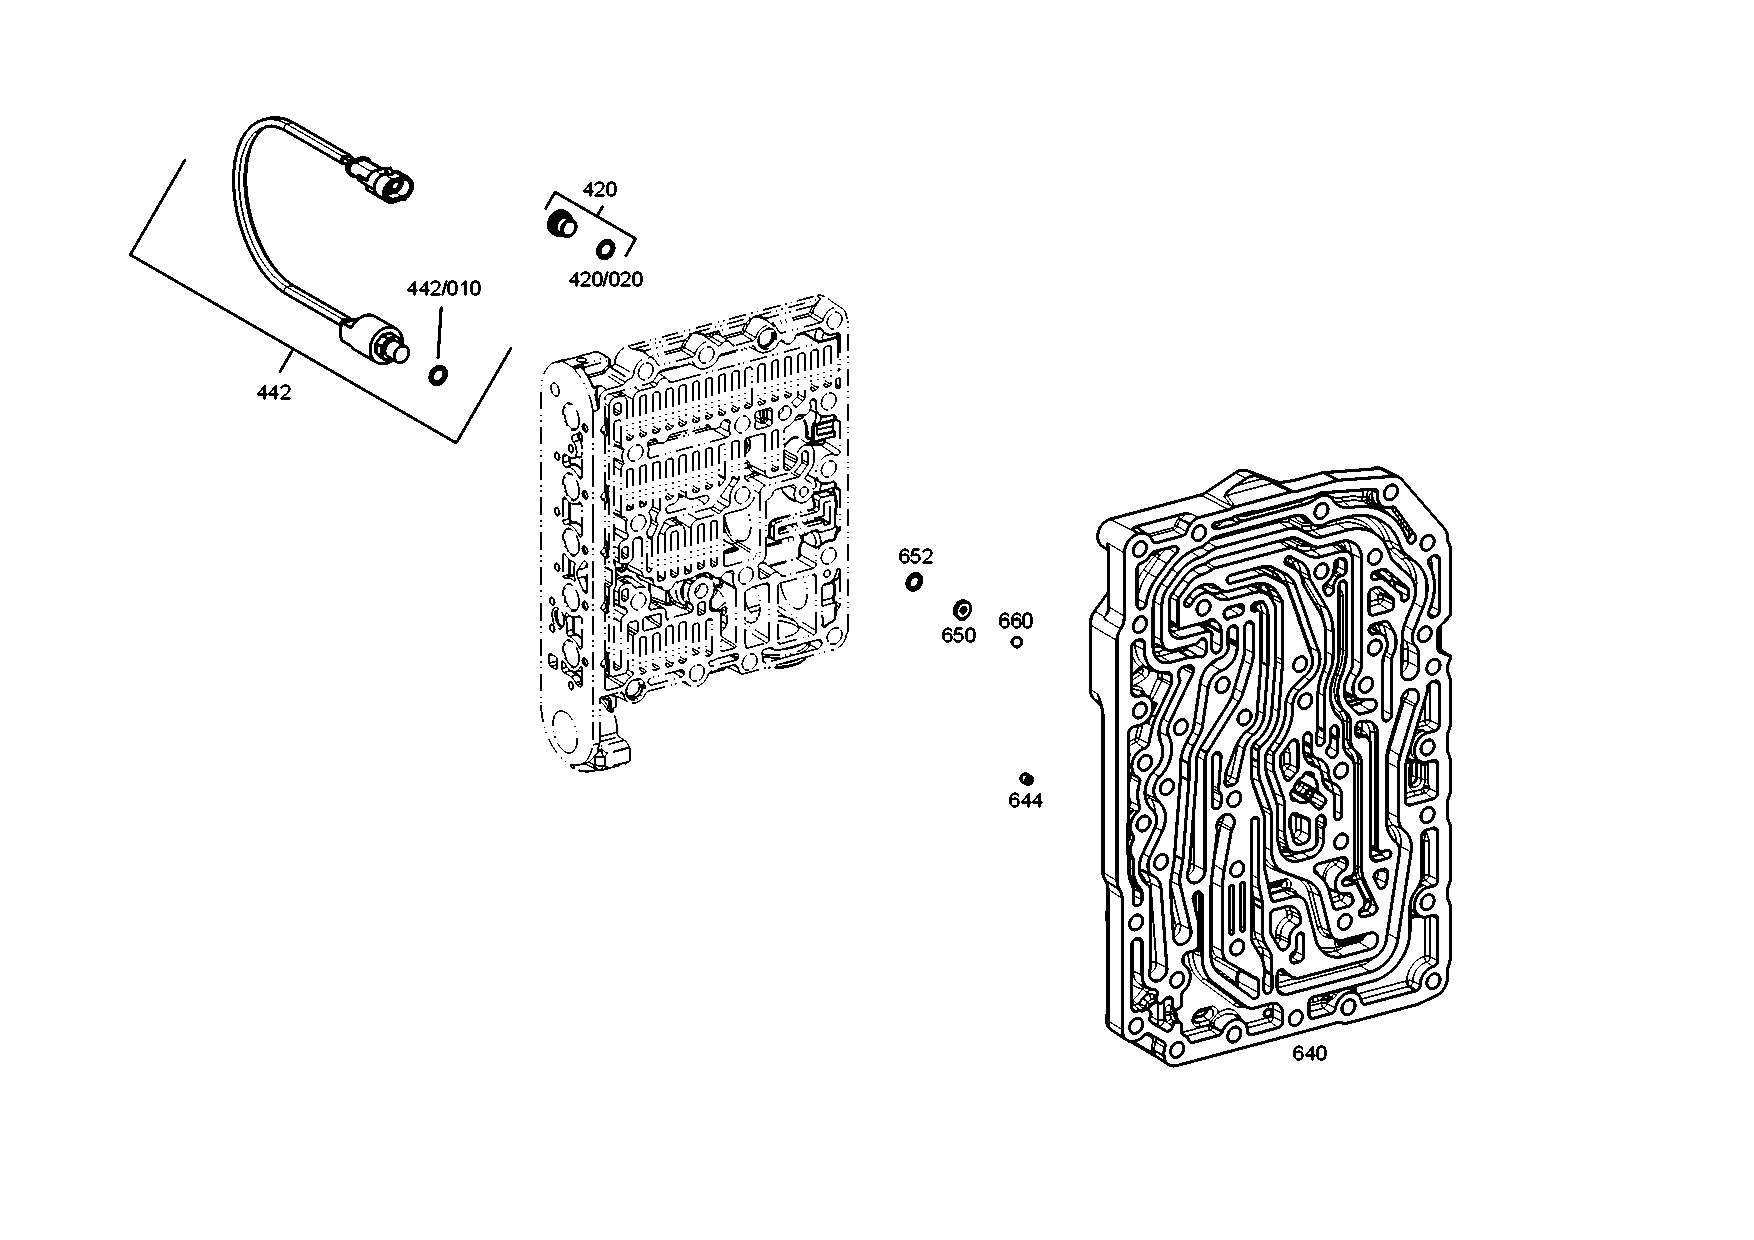 drawing for AGCO F824100090630 - BALL